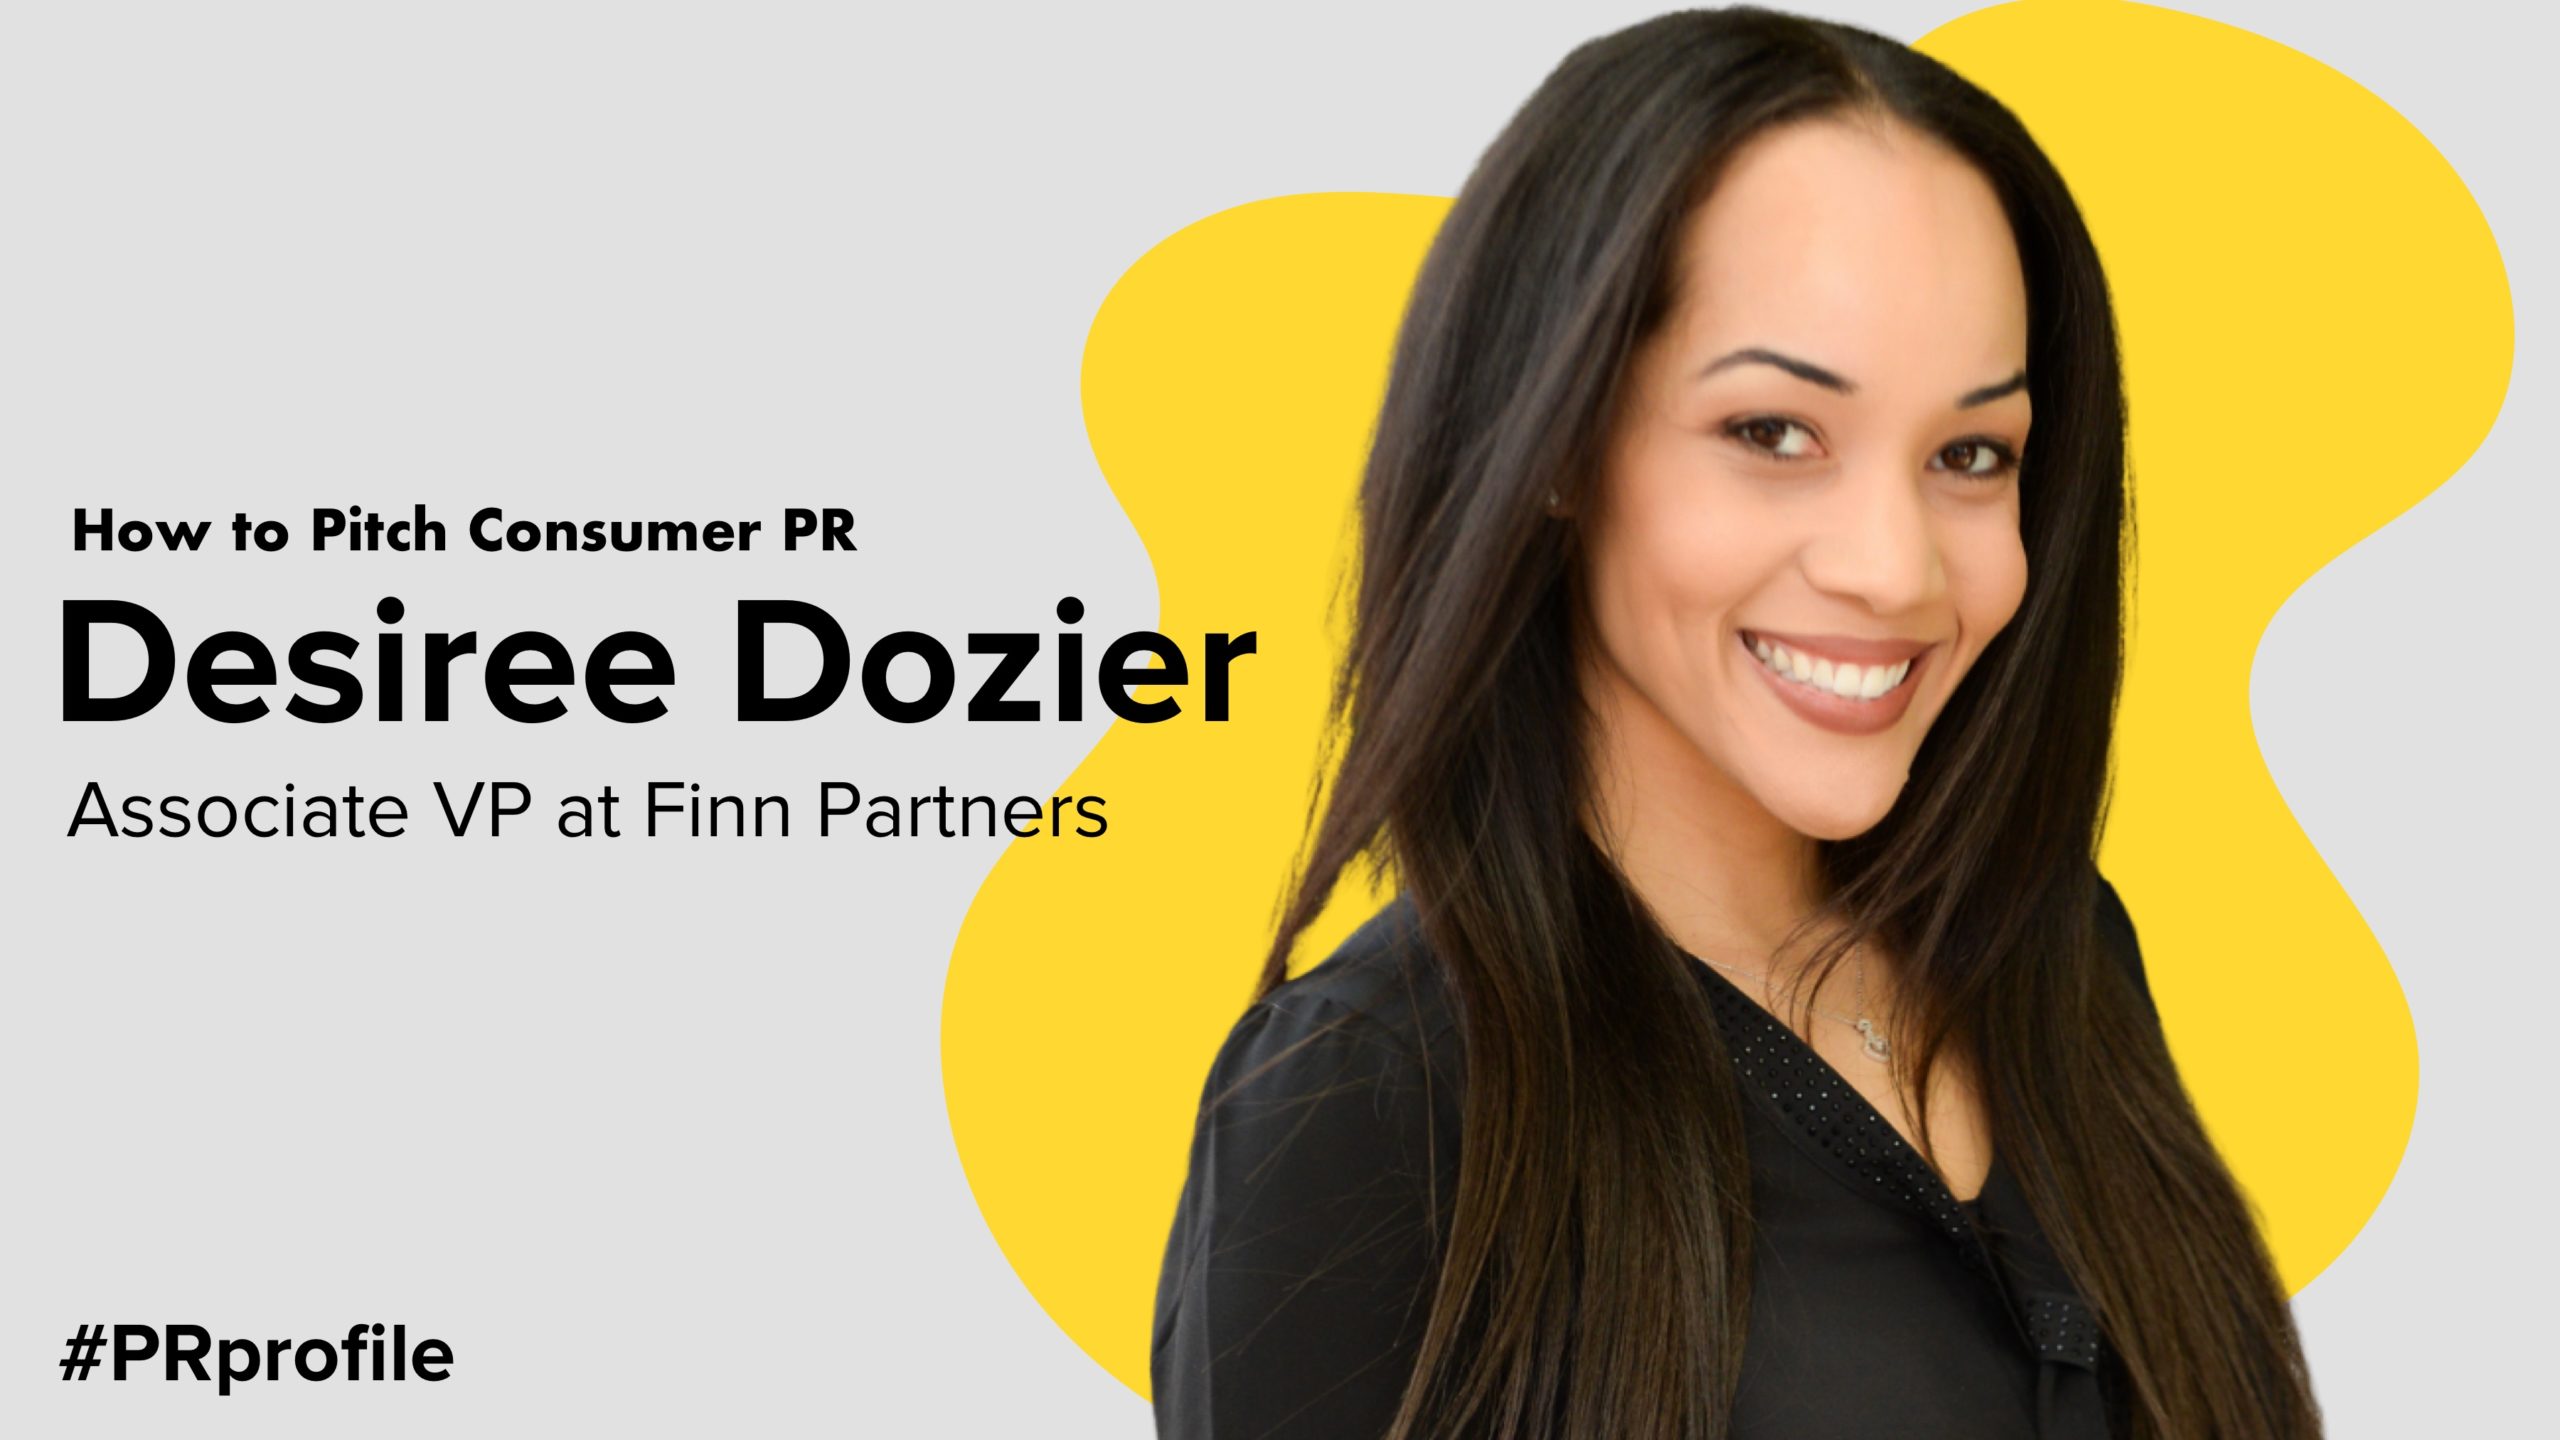 How to Pitch Consumer PR with Desiree Dozier, Finn Partners